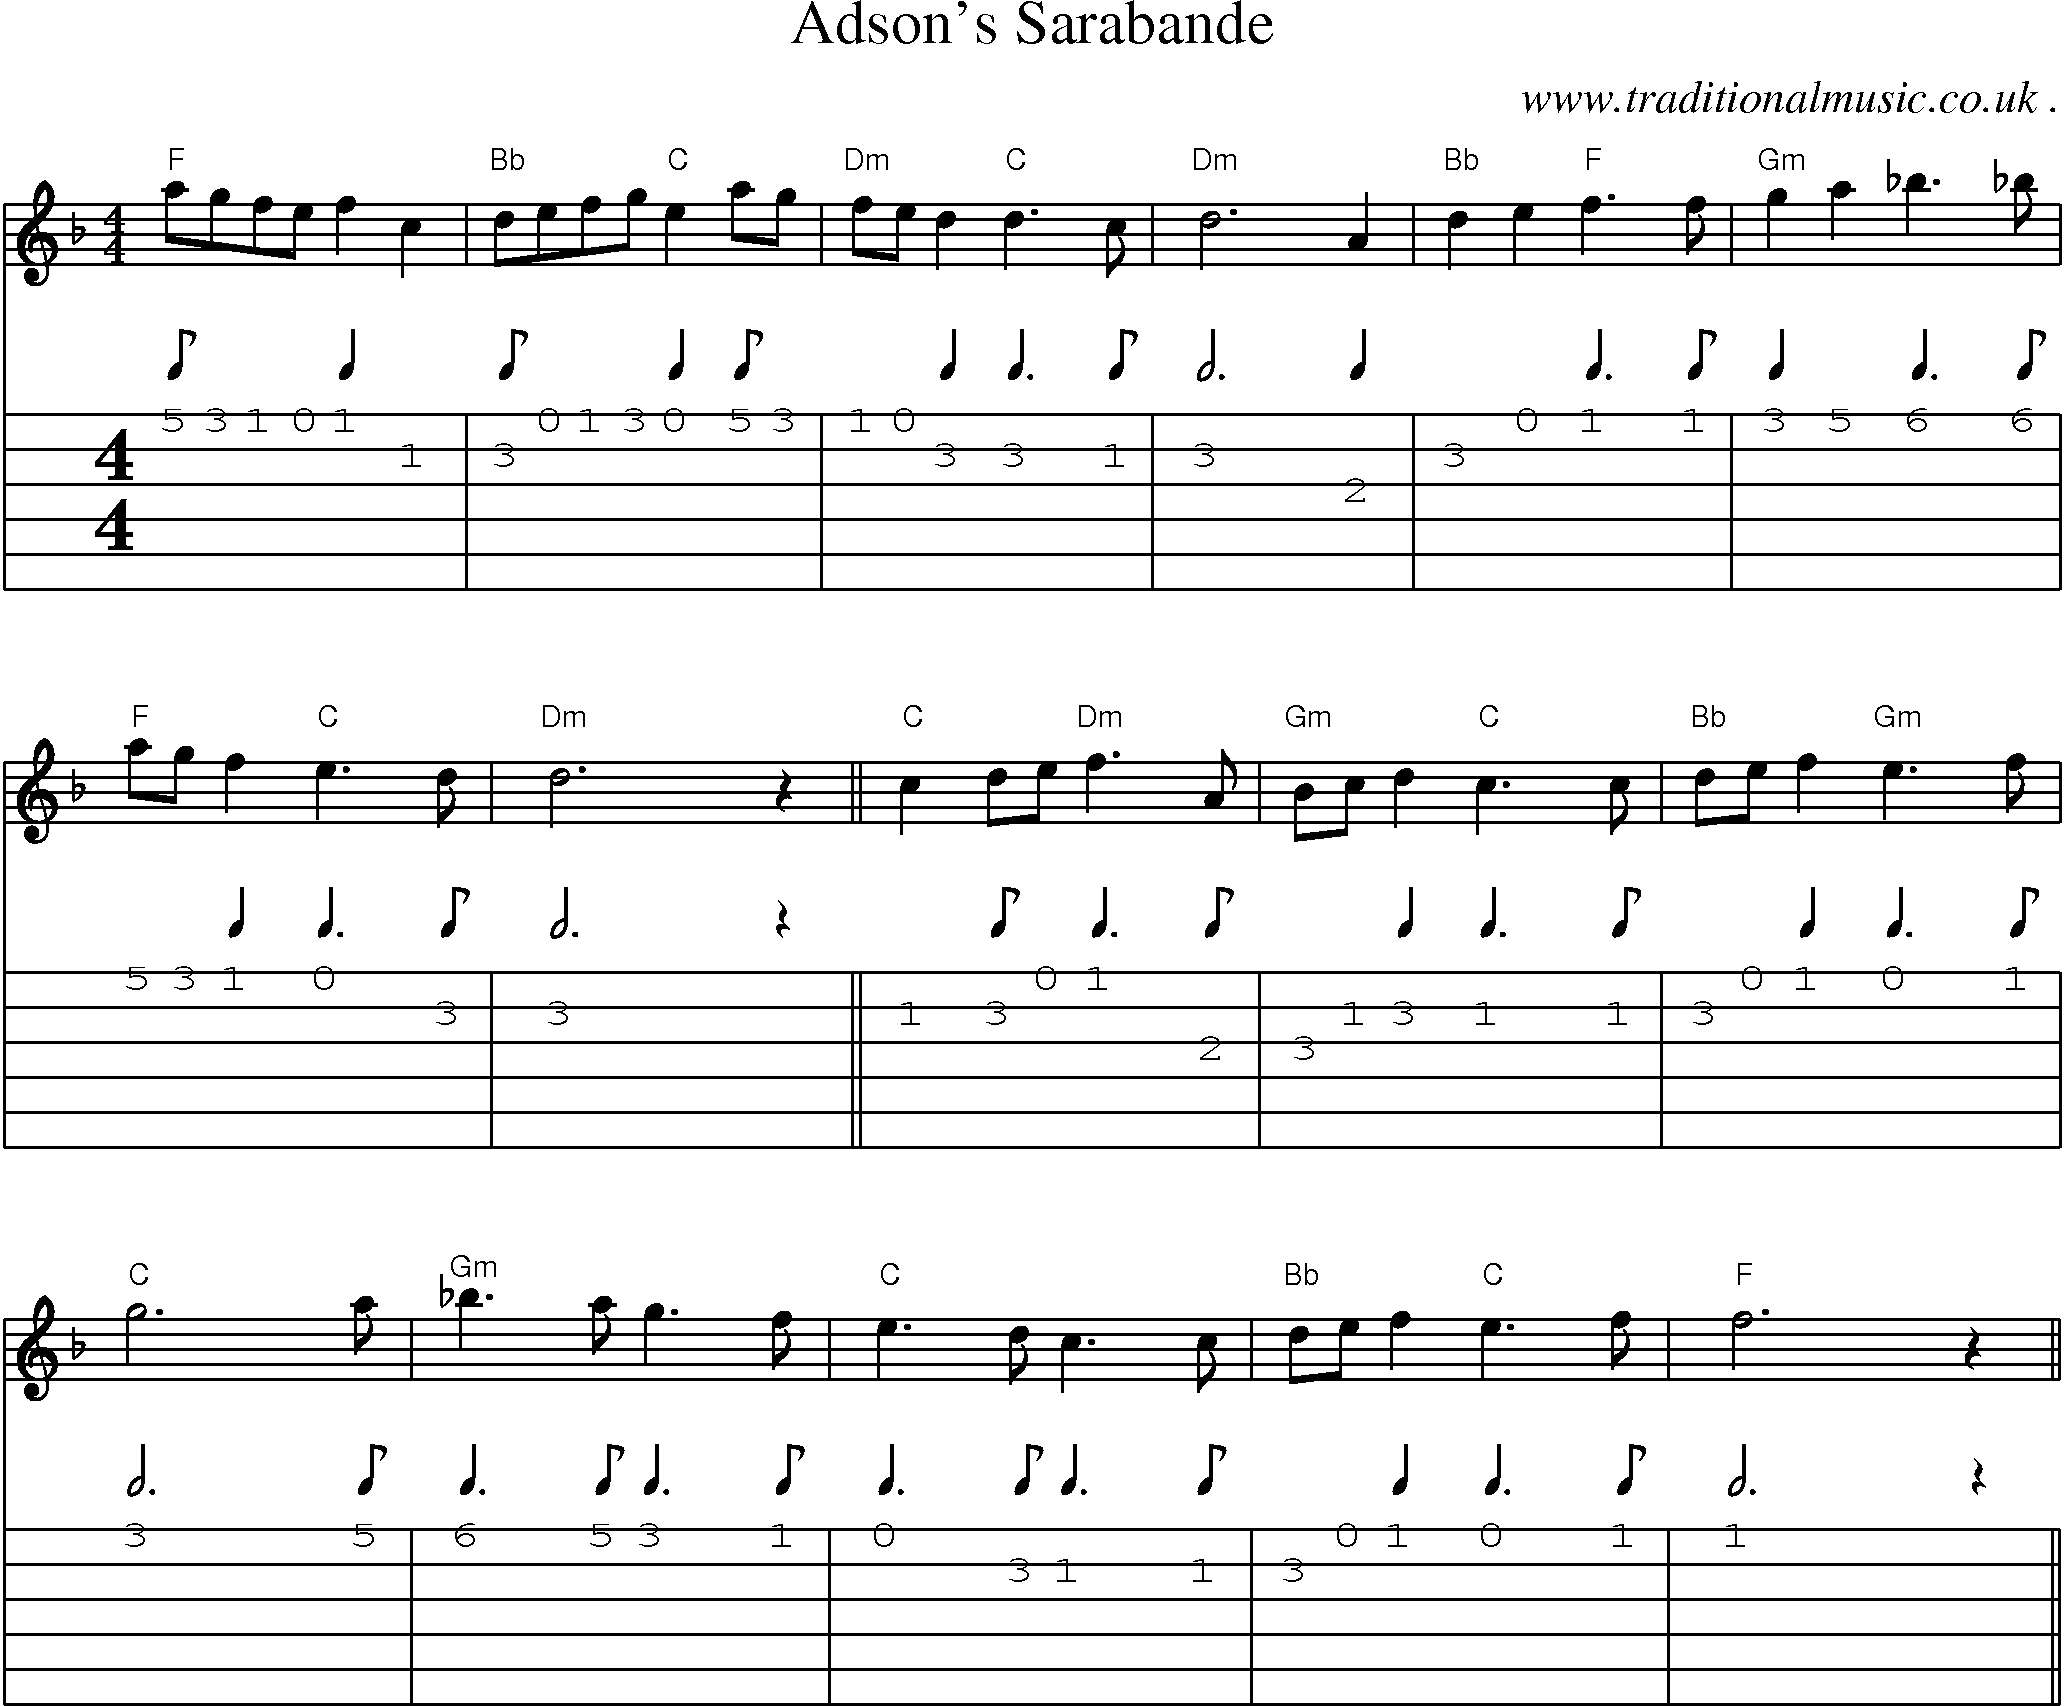 Sheet-Music and Guitar Tabs for Adsons Sarabande